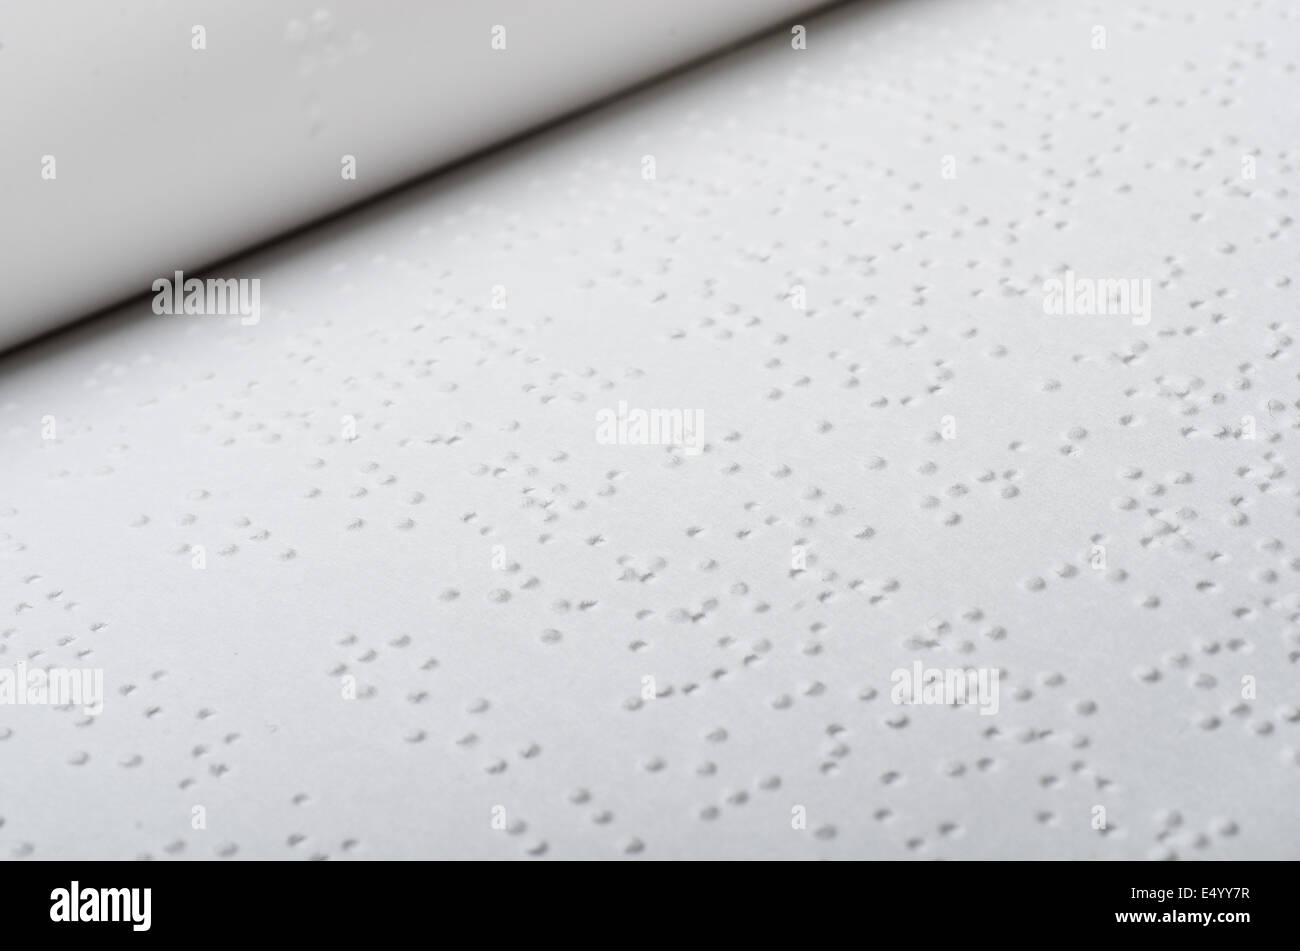 Сlose up of open book written in braille Stock Photo